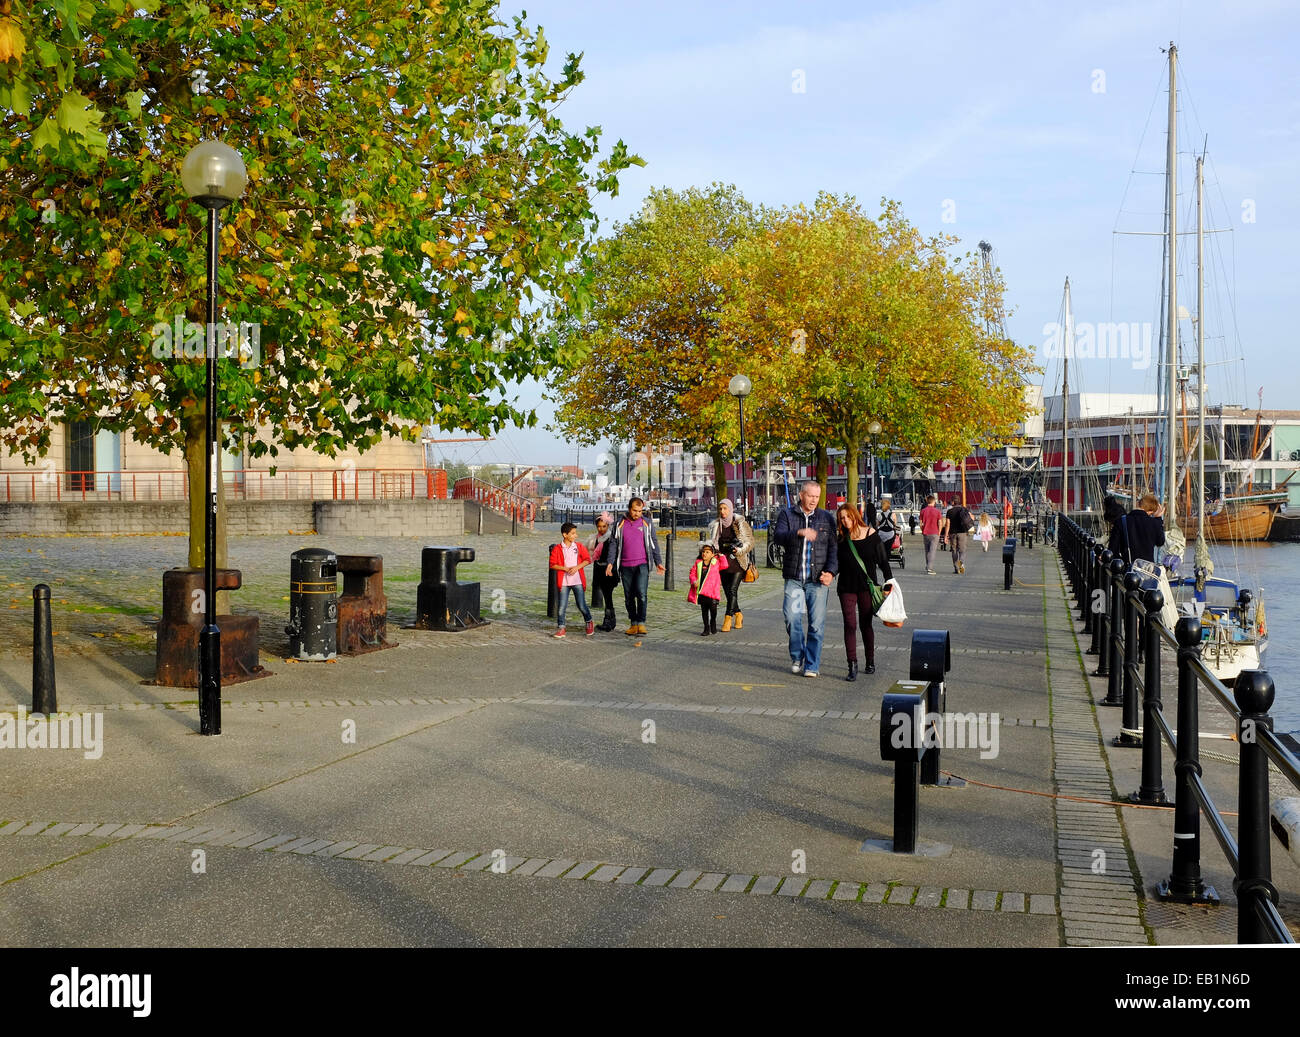 Bristol, England - October 31st, 2014: People walking on Hanover Quay in the Canon's Marsh area of the old docks. Stock Photo